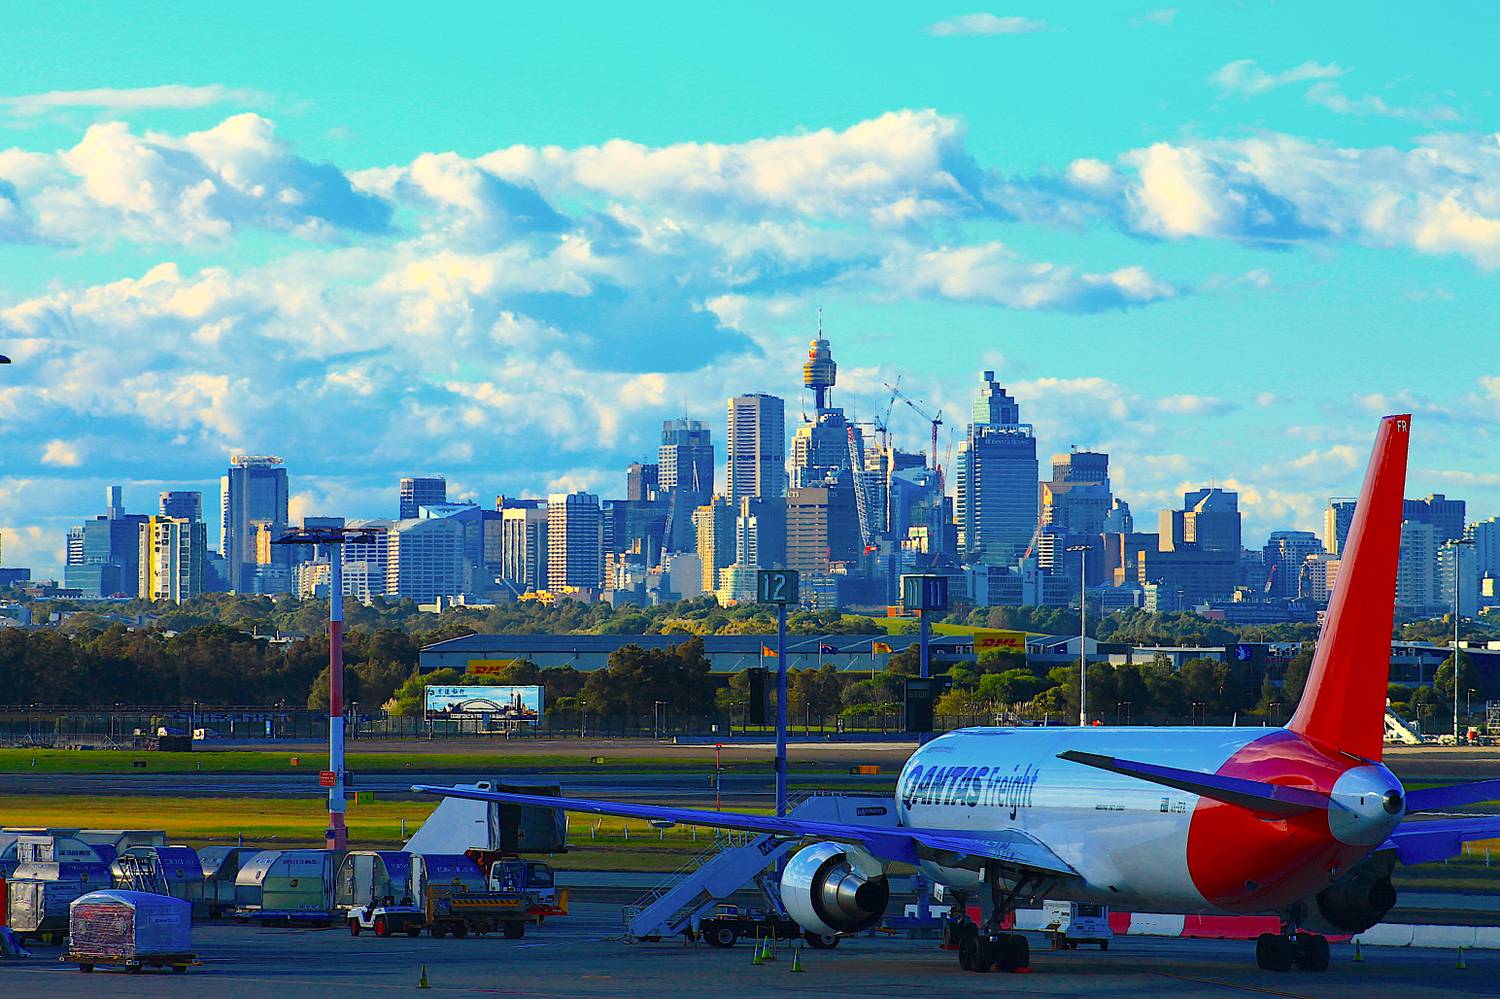 Sydney airport is the busiest in Australia